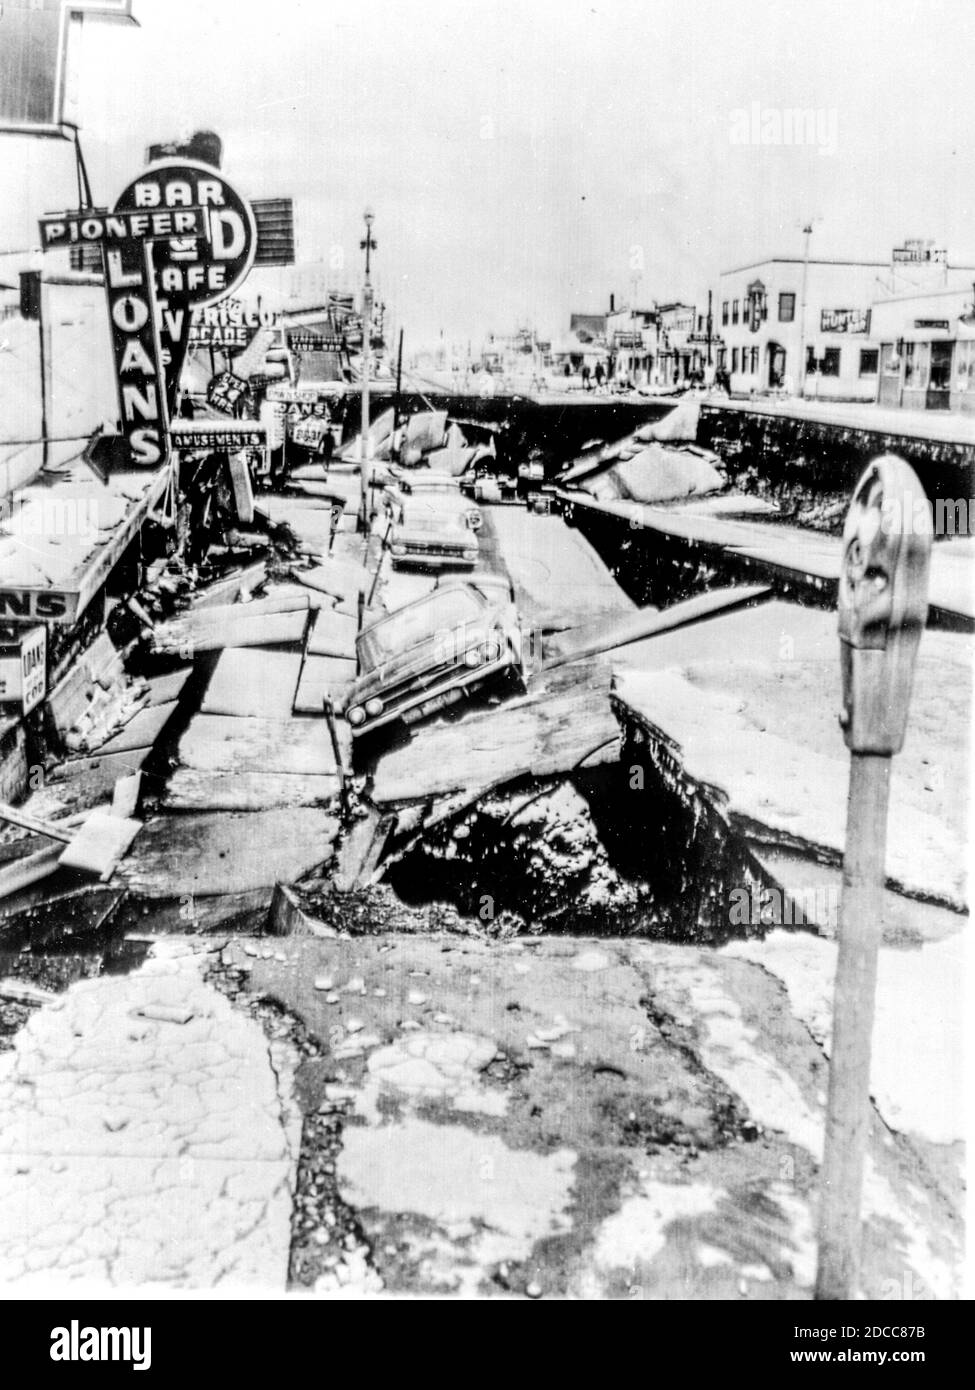 Damage to 4th Avenue in Anchorage caused by the Great Alaskan Earthquake and landslide of Good Friday 1964. At 9.2 magnitude it remains the most powerful earthquake in North American history and the second most powerful earthquake in world history. Stock Photo